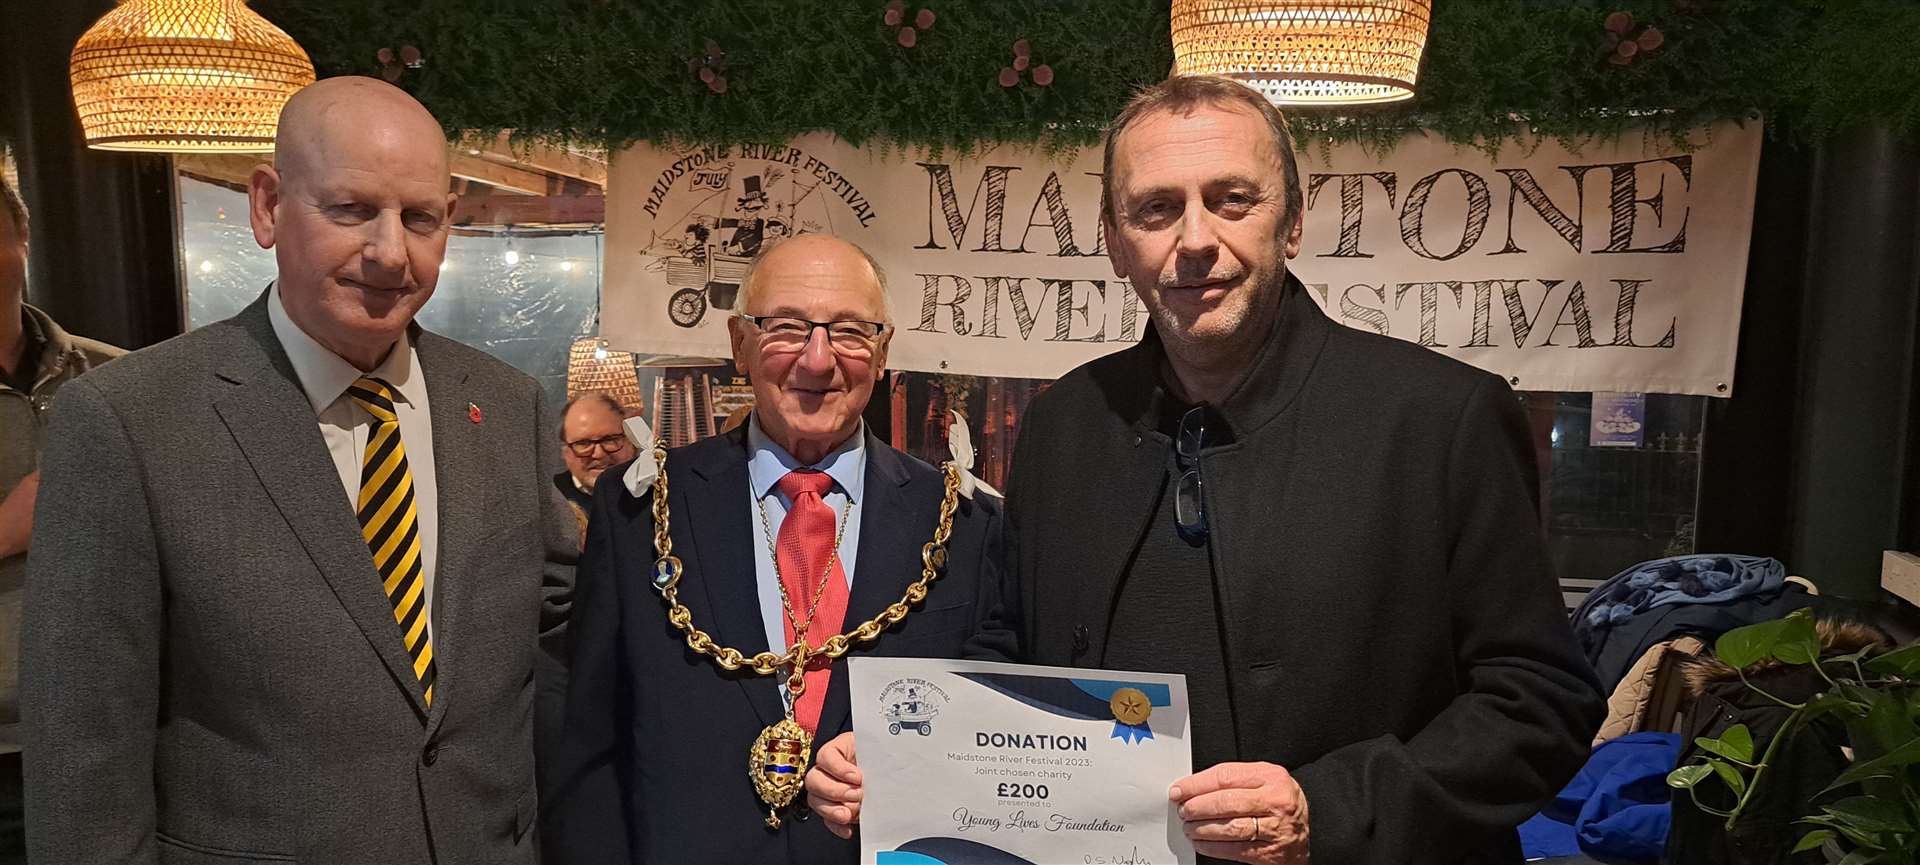 Neil Vickery receives a £200 donation from the River Festival on behalf of the Young Lives Foundation, with Dave Naghi and the mayor Gordon Newton